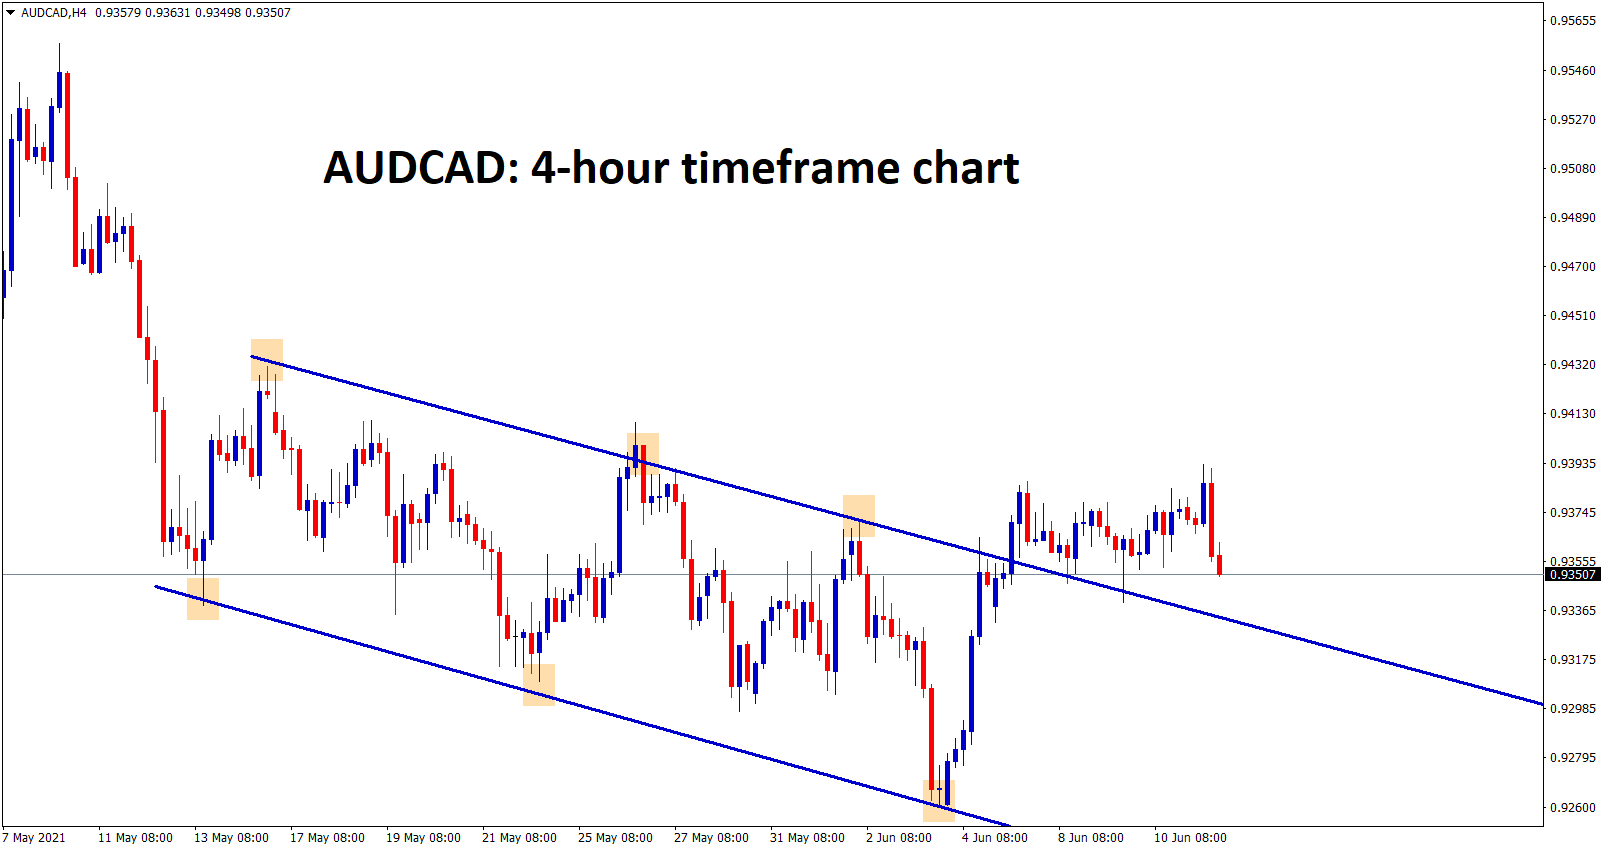 AUDCAD is consolidating after the breakout of the descending channel